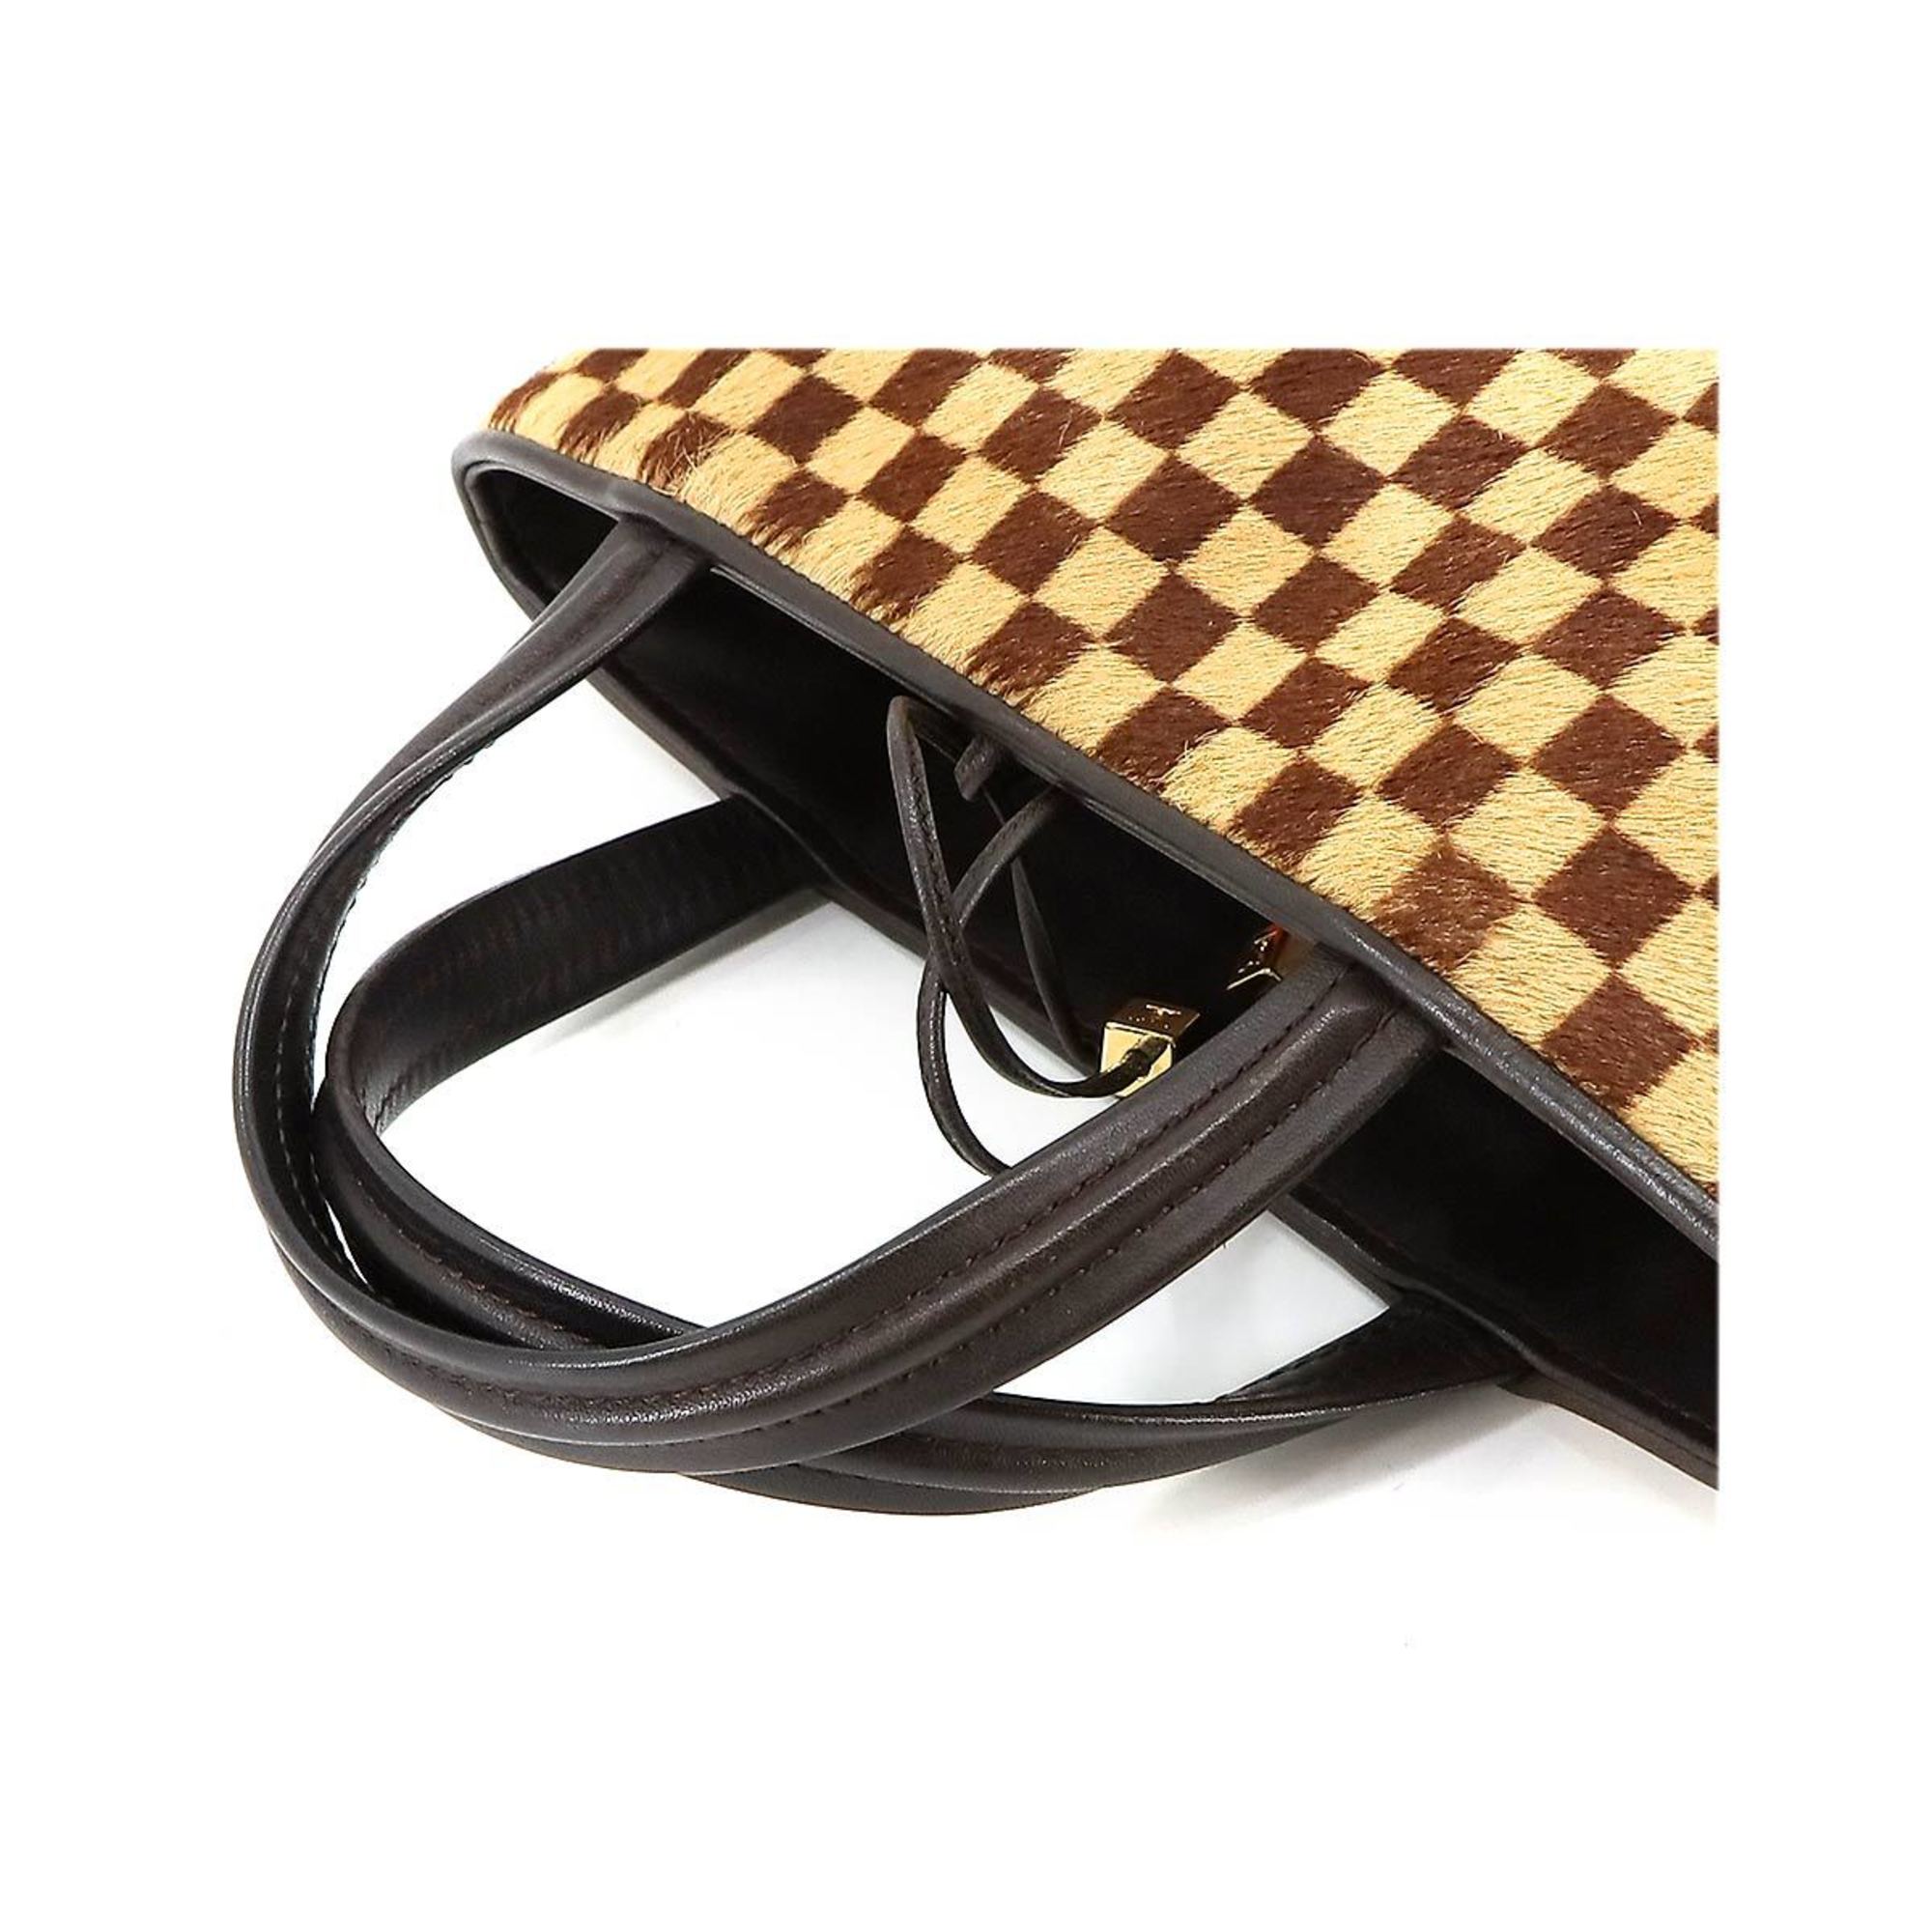 Louis Vuitton Damier Sauvage Impala hand bag in brown pony leather M92133